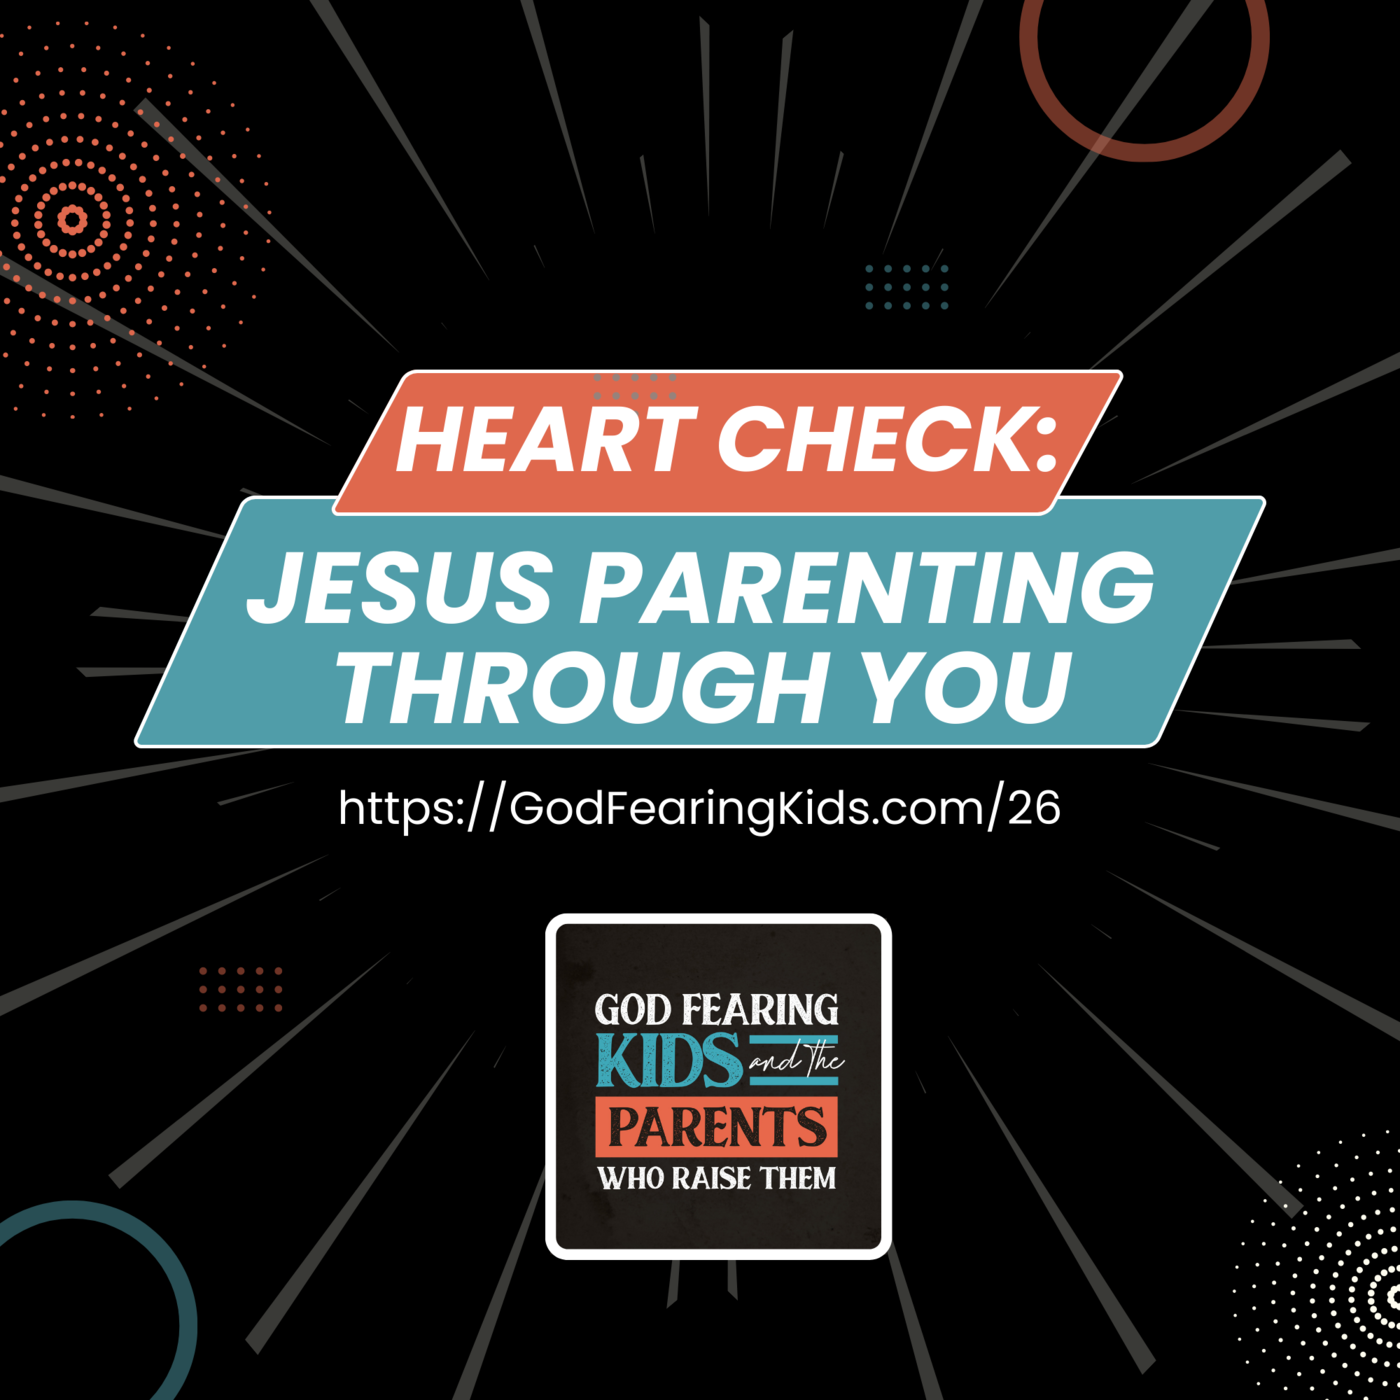 026: HEART CHECK: Depend on Jesus to parent through you